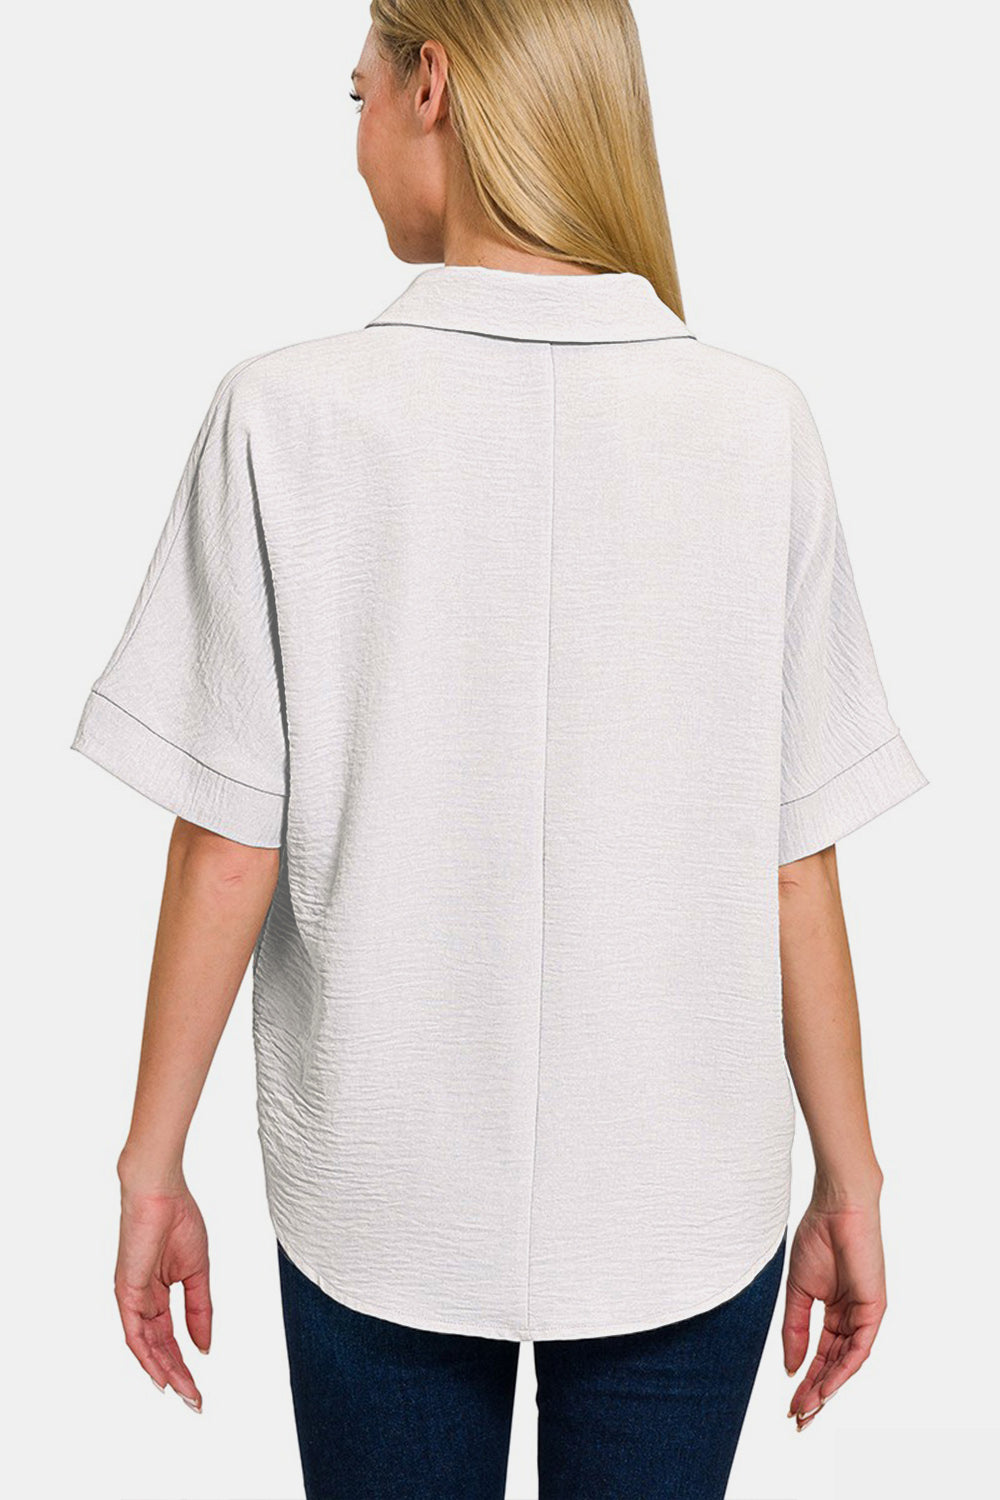 Textured Collared Short Sleeve Top in Off-White